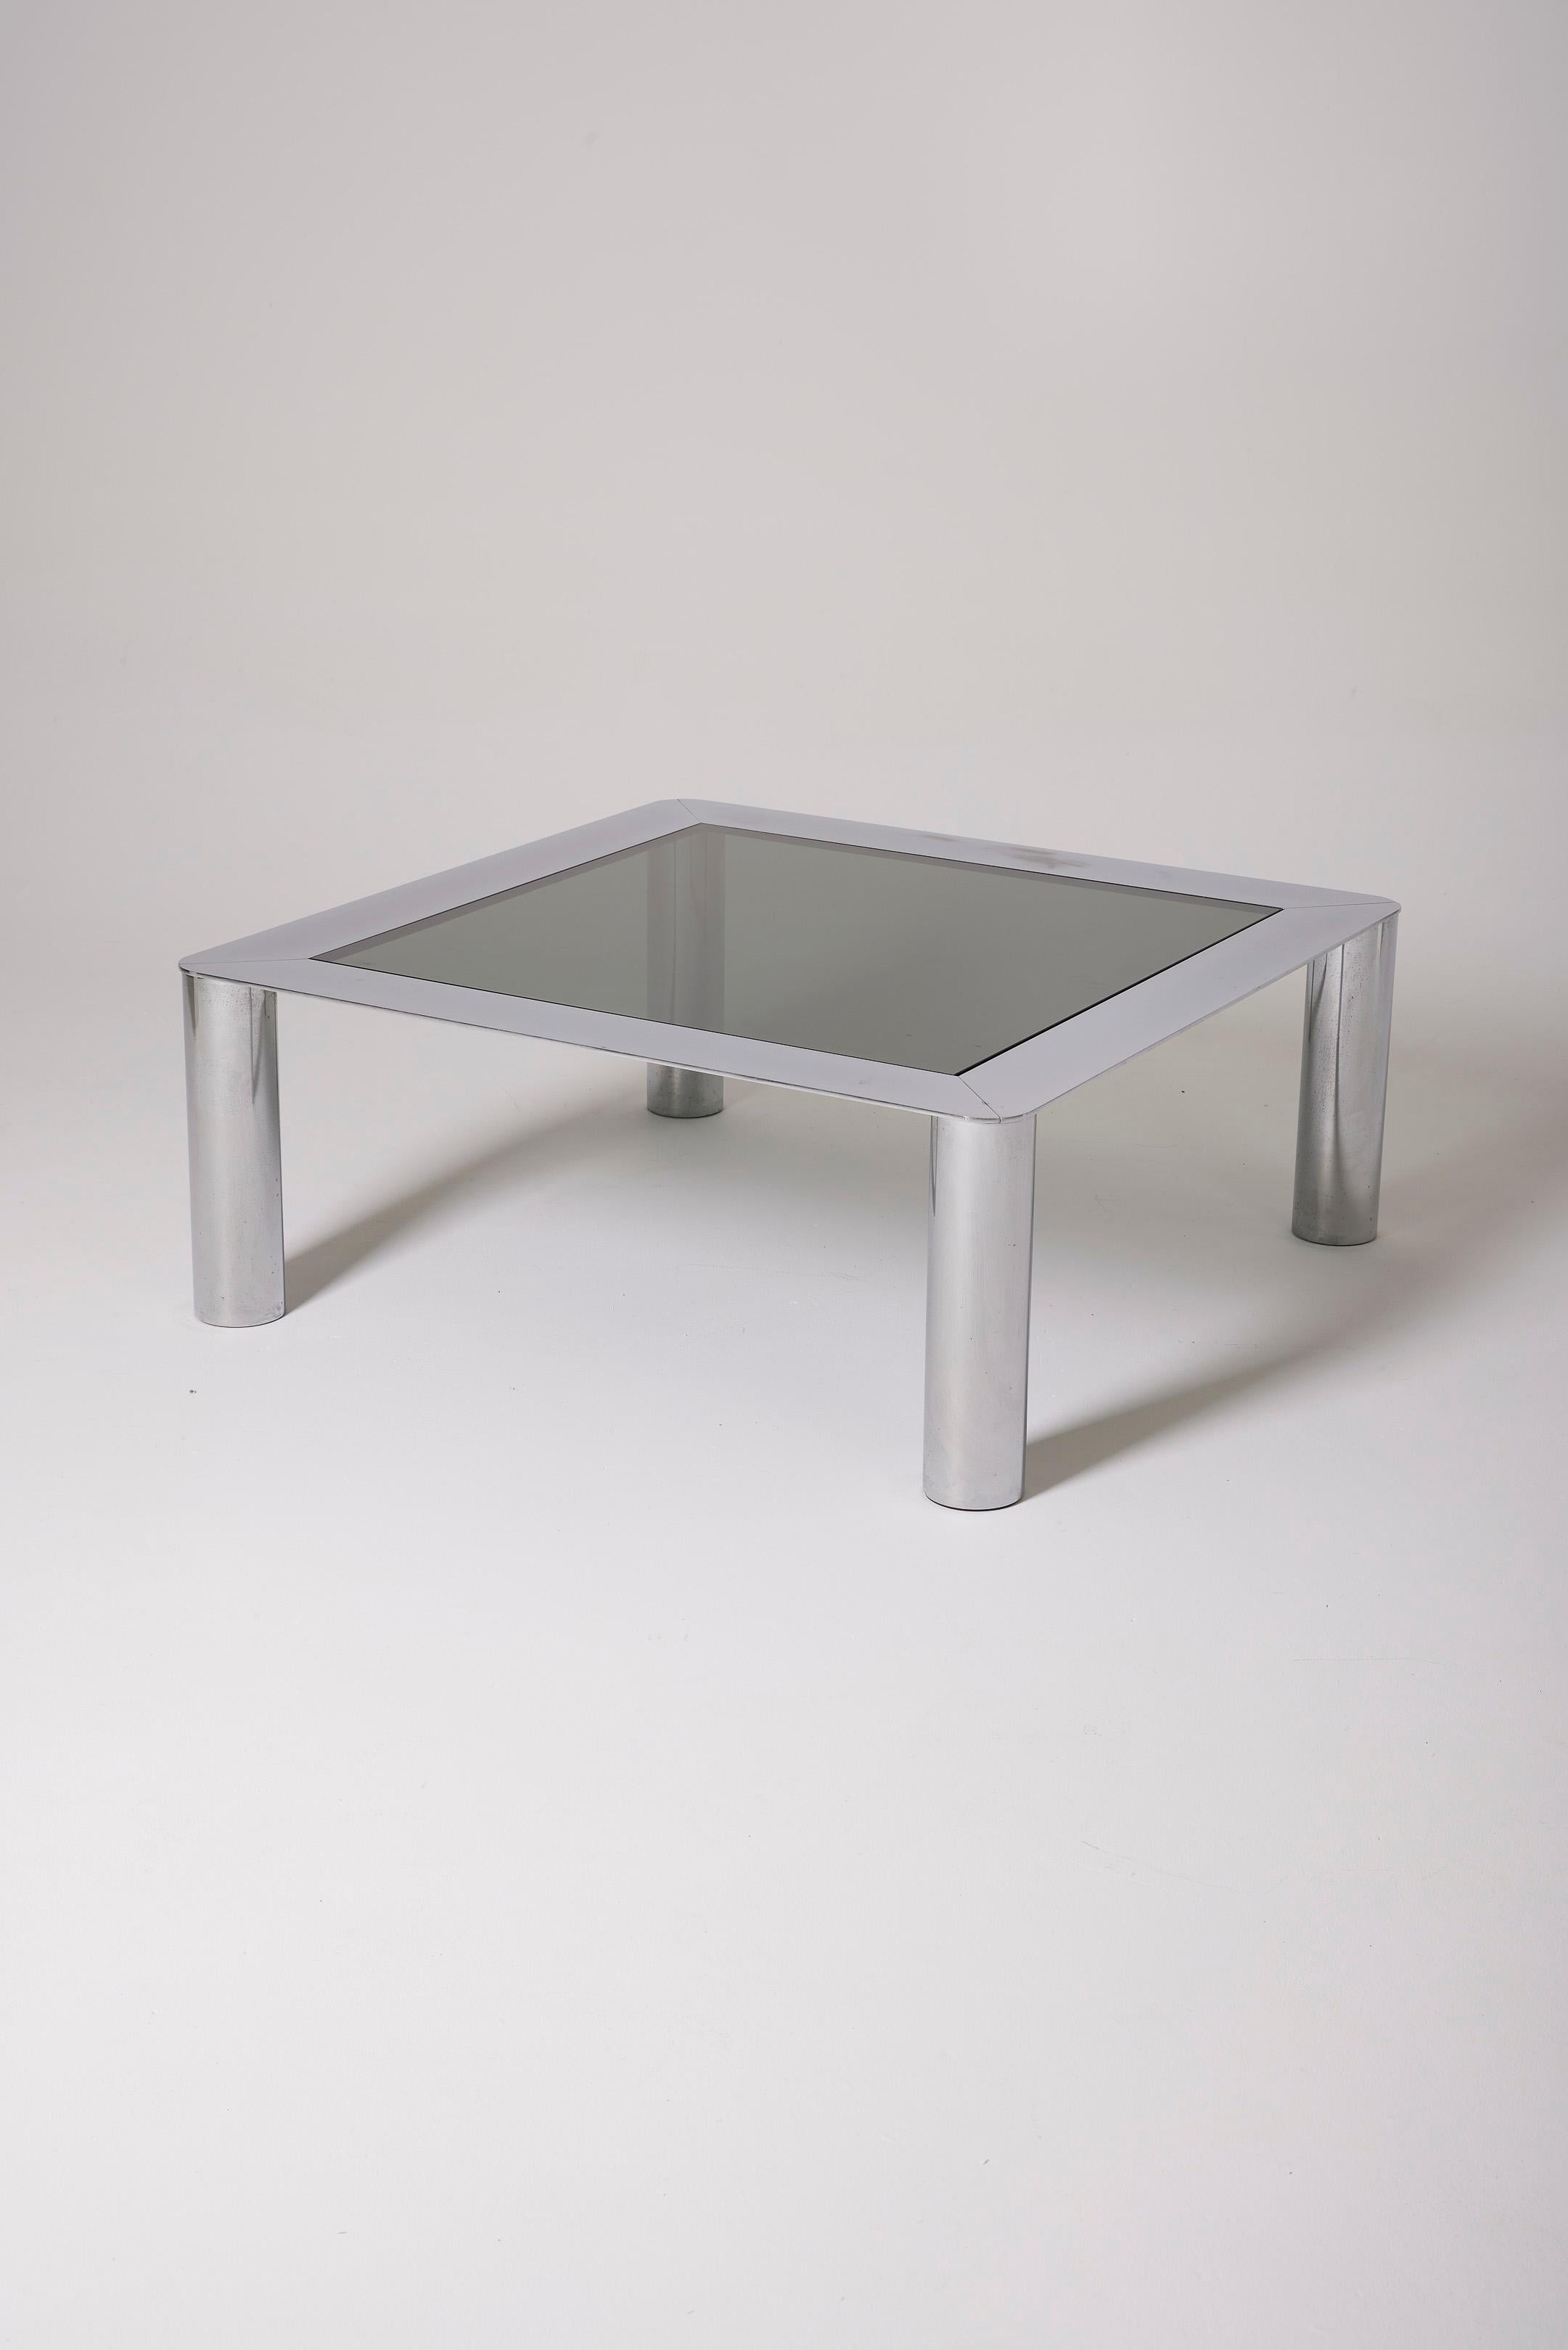  Coffee table by Italian designer Sergio Mazza for Cinova in the 1970s. The top is made of smoked glass and the structure is in chrome metal. Good condition. Mazza was famous for his contributions to the design of lighting fixtures and furniture